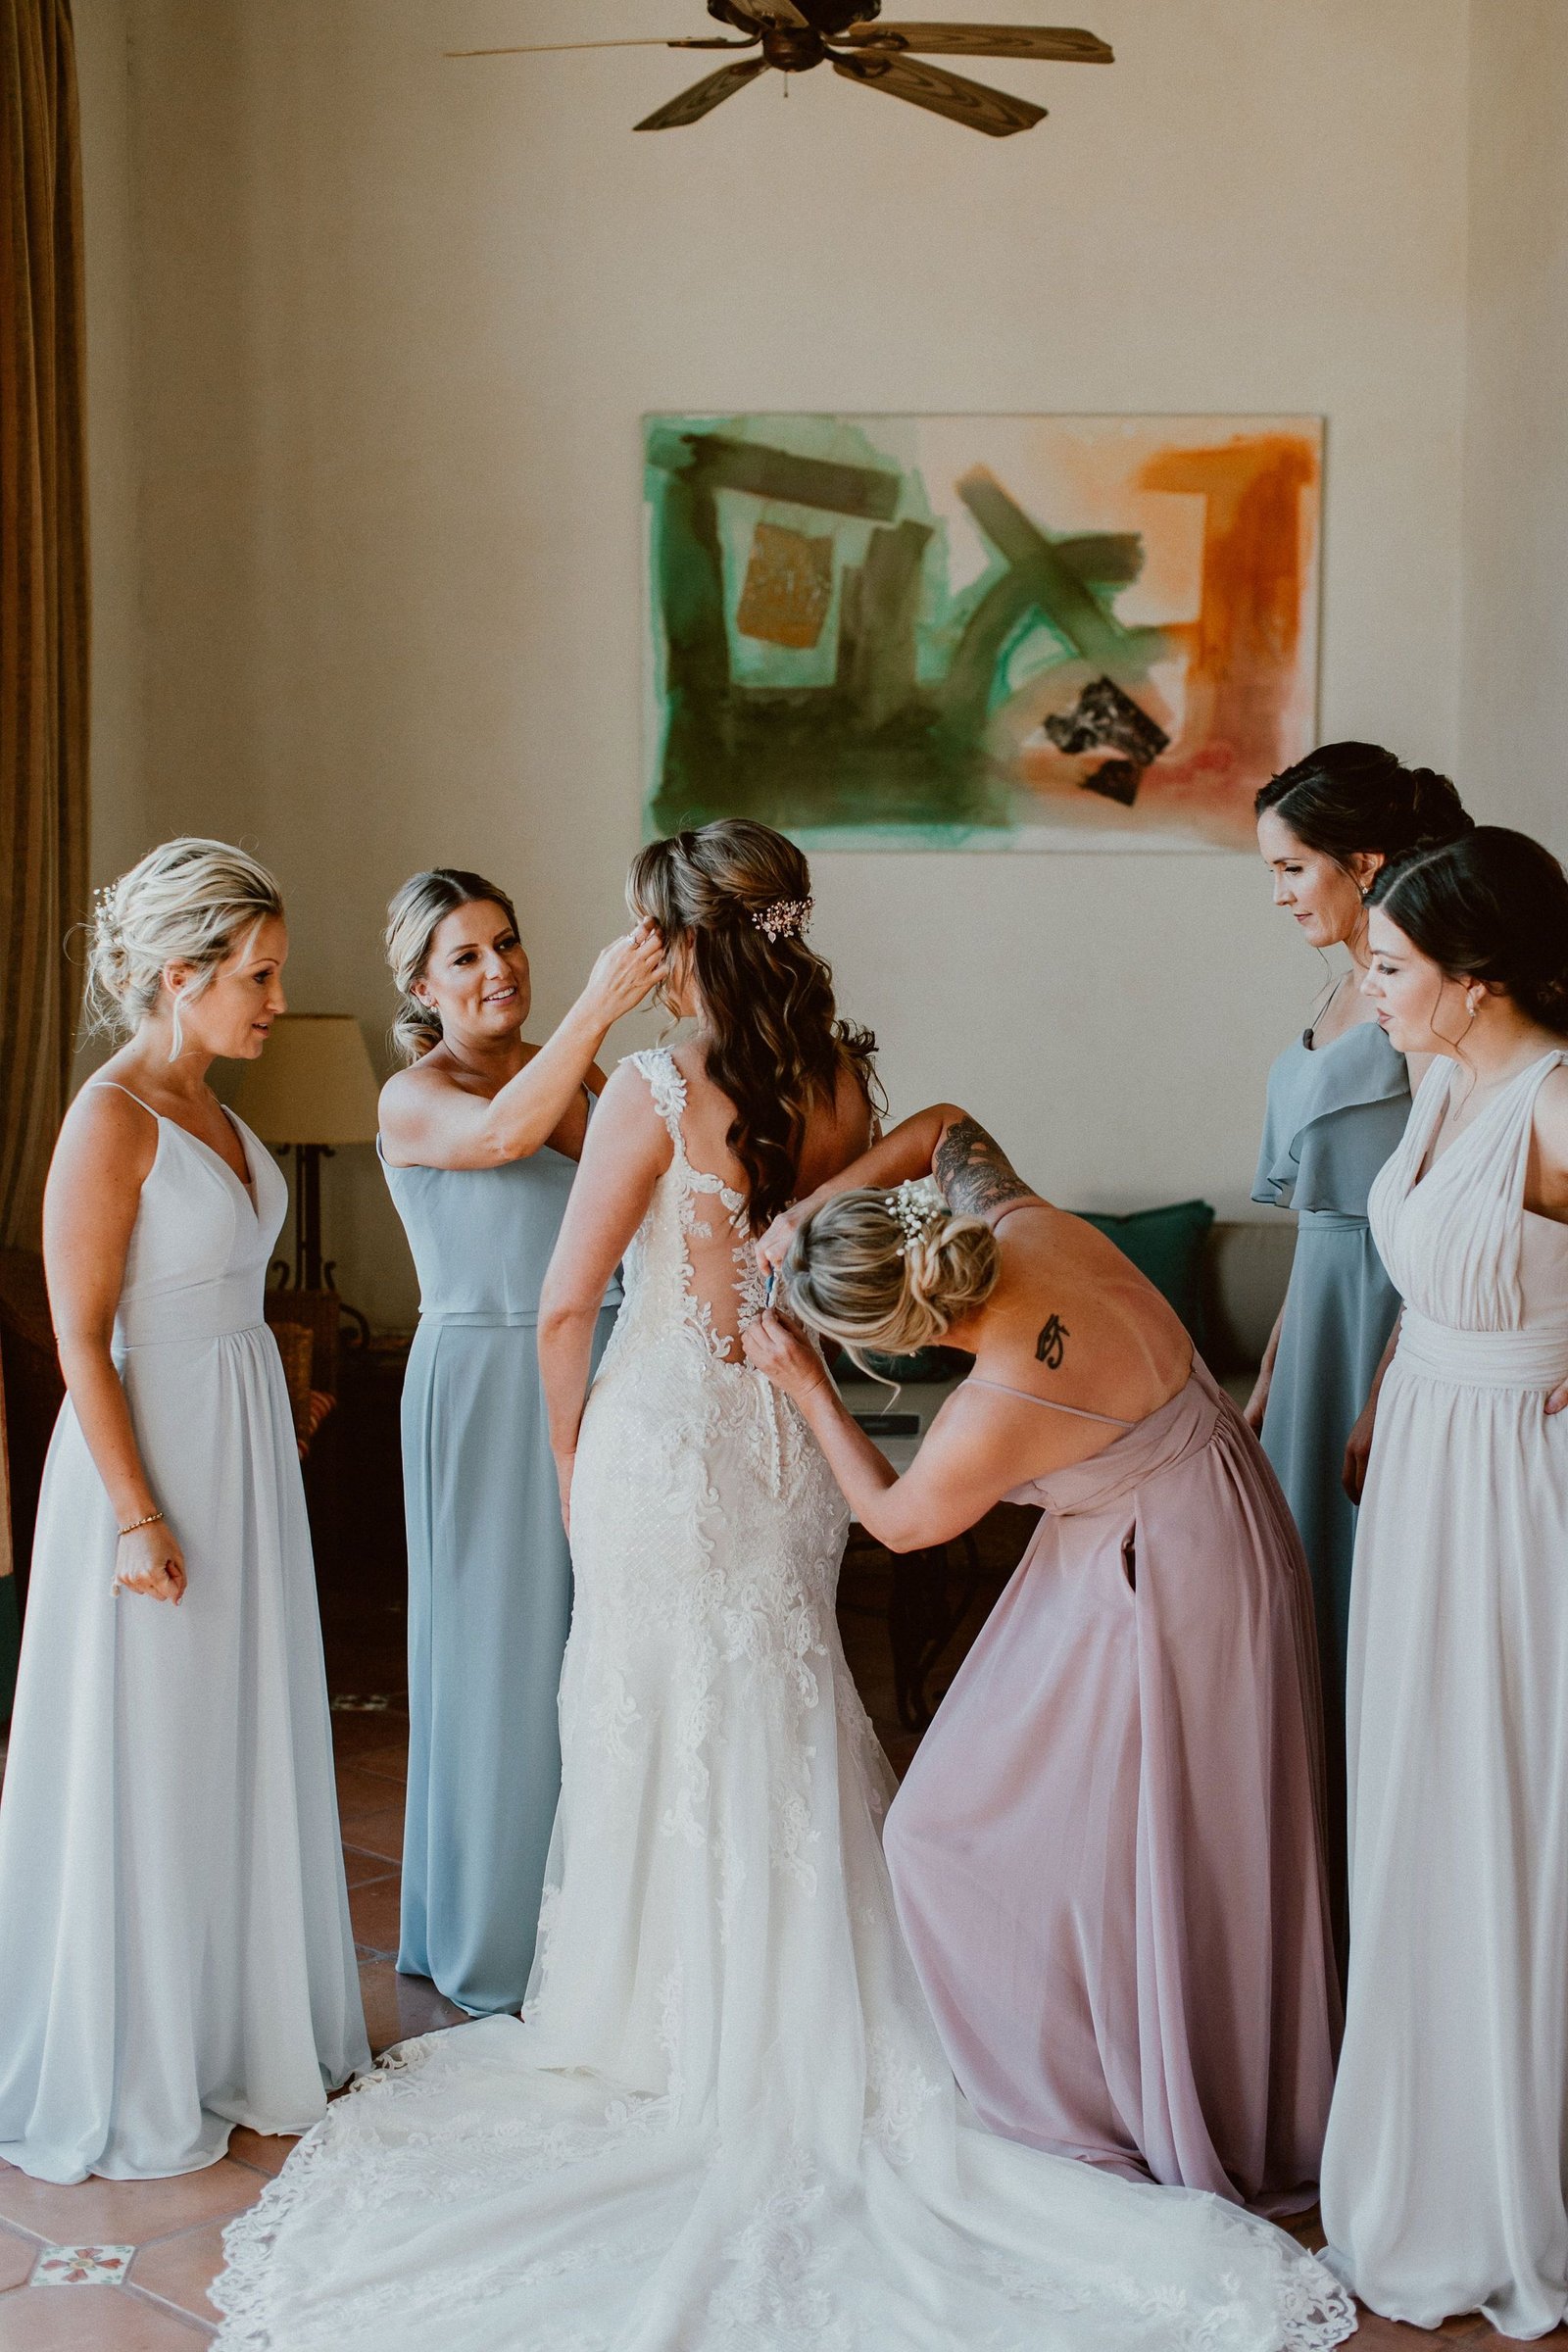 Bride getting ready with her Bridesmaids, getting her dress on. This was at her Bridal Suite in Cabo Del Sol, in Los Cabos, Mexico. This was January, 2019 and she hosted her wedding day with 50 of her closest Family and Friends, who most of them came from Oregon and Minnesota. 